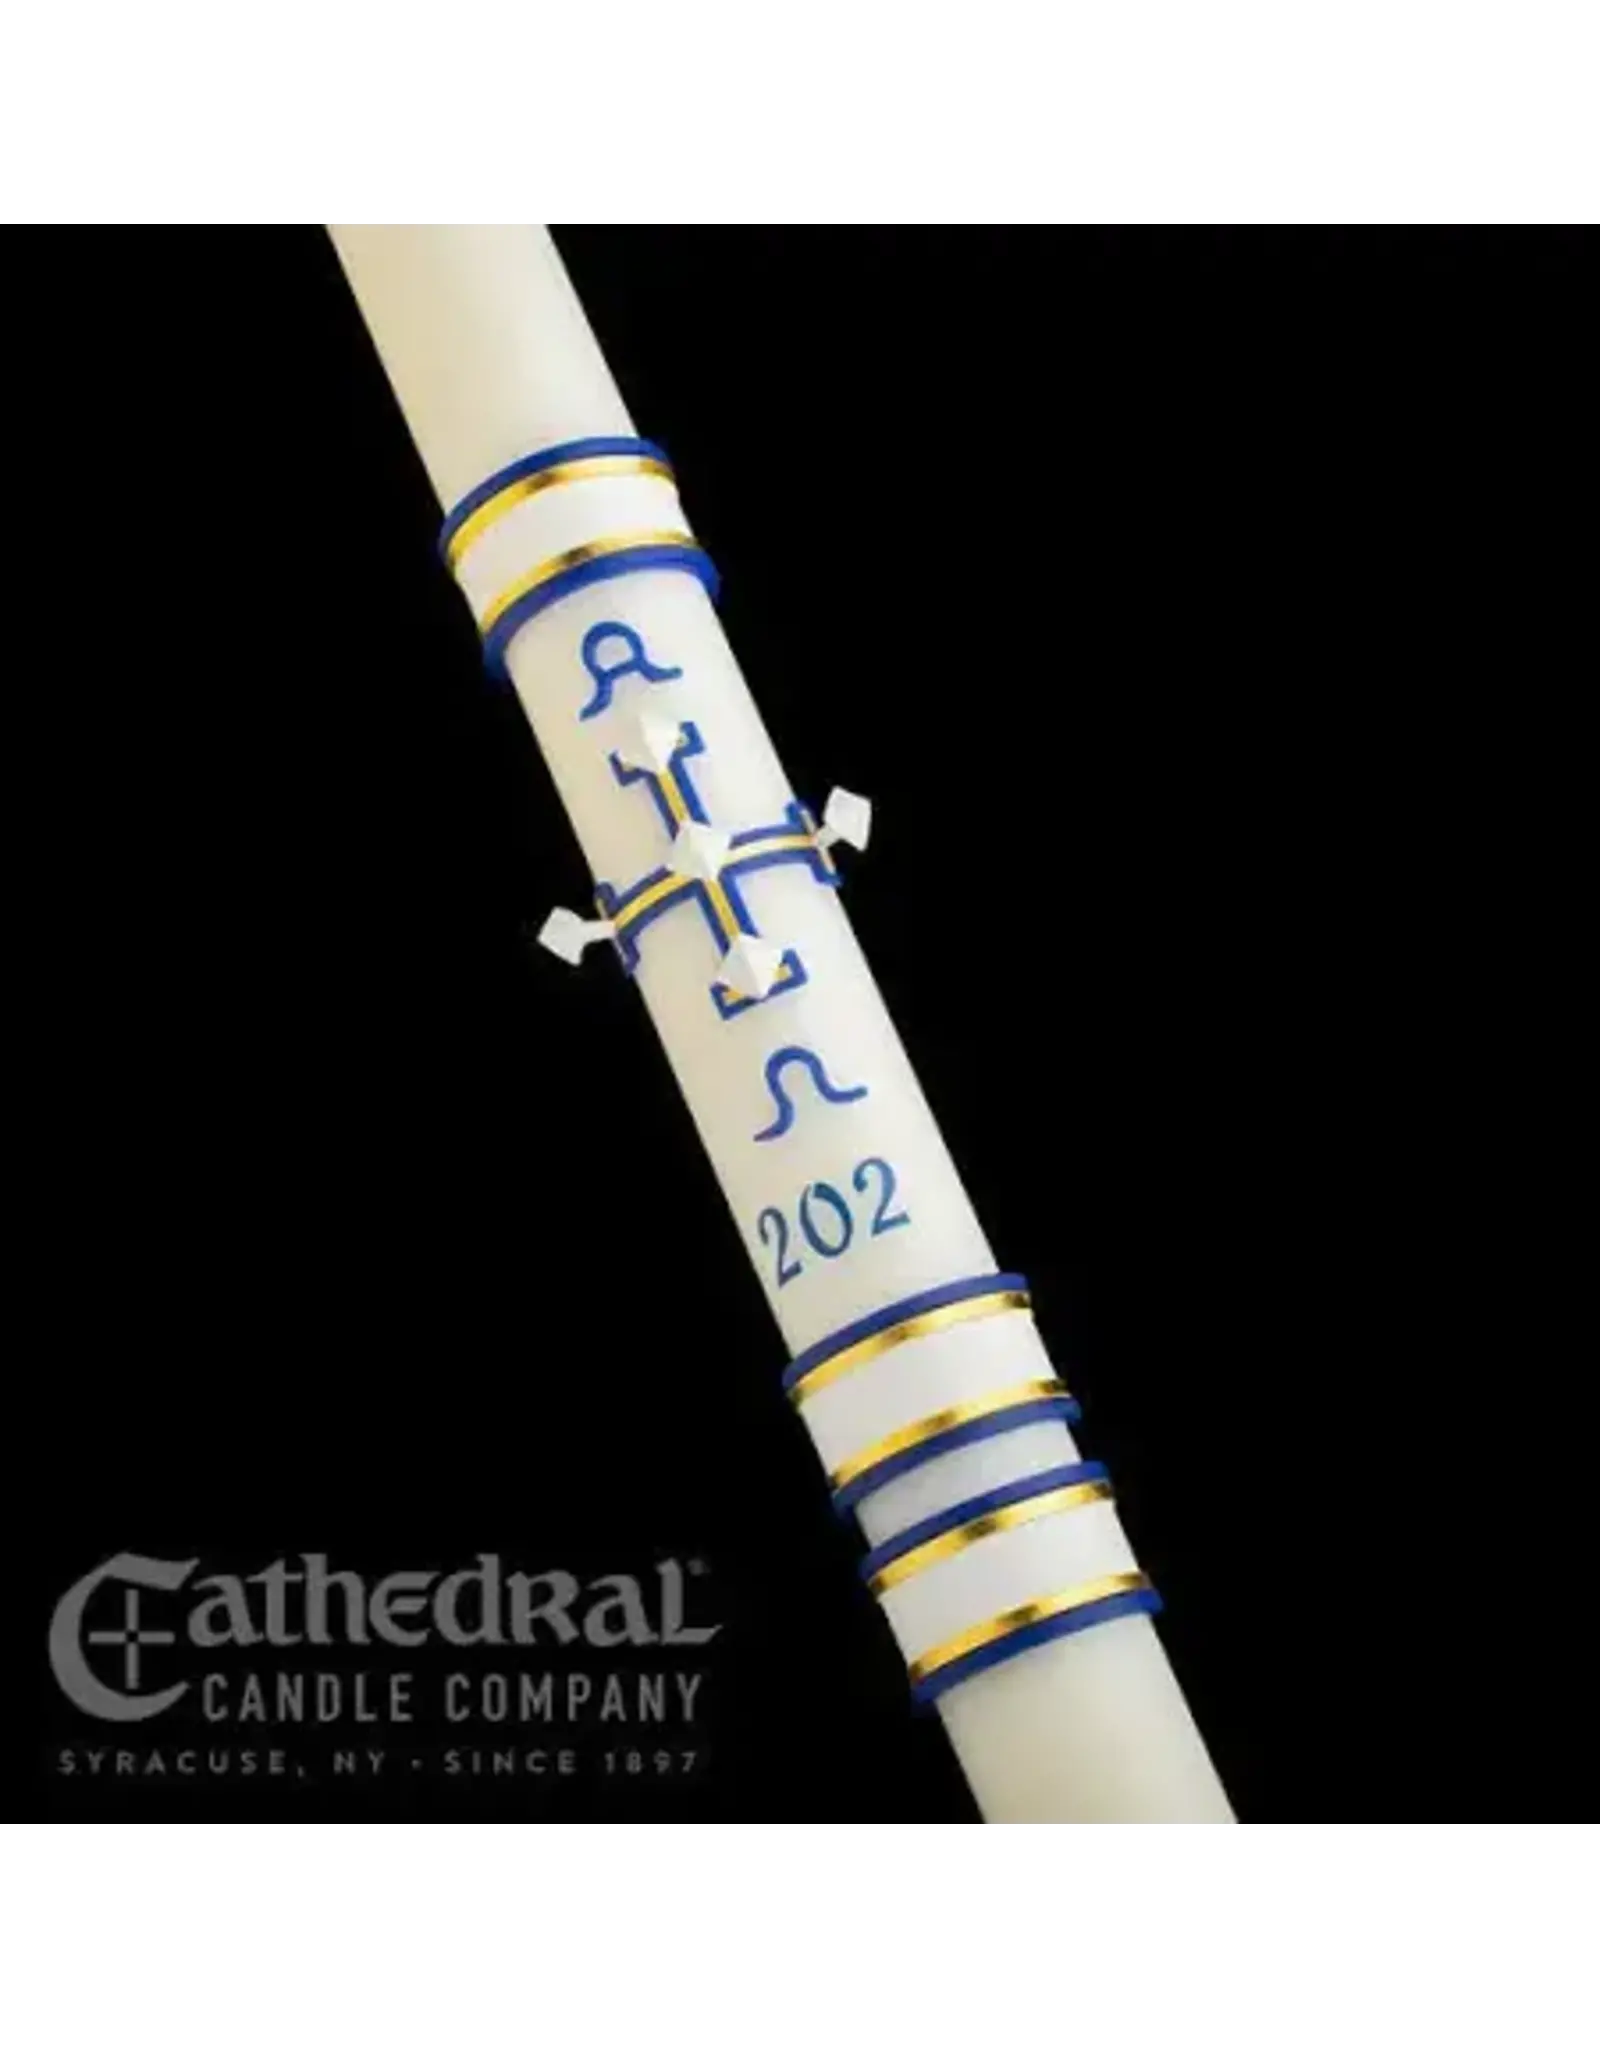 Cathedral Candle Eternal Glory Paschal Candle